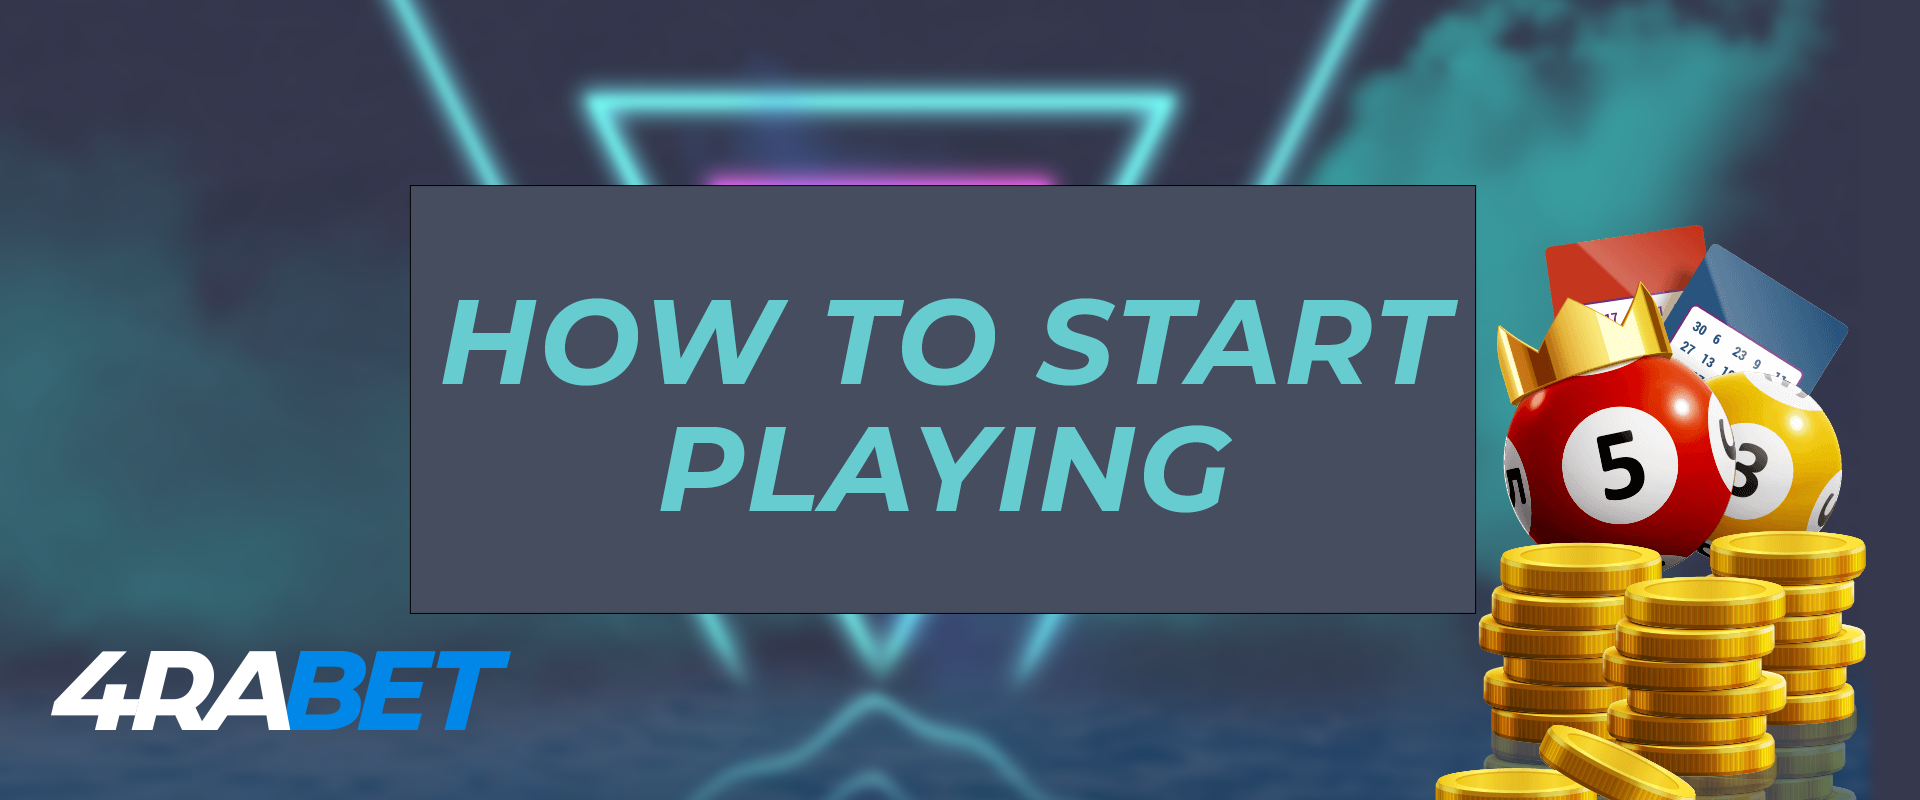 How to start playing on keno on the 4rabet.